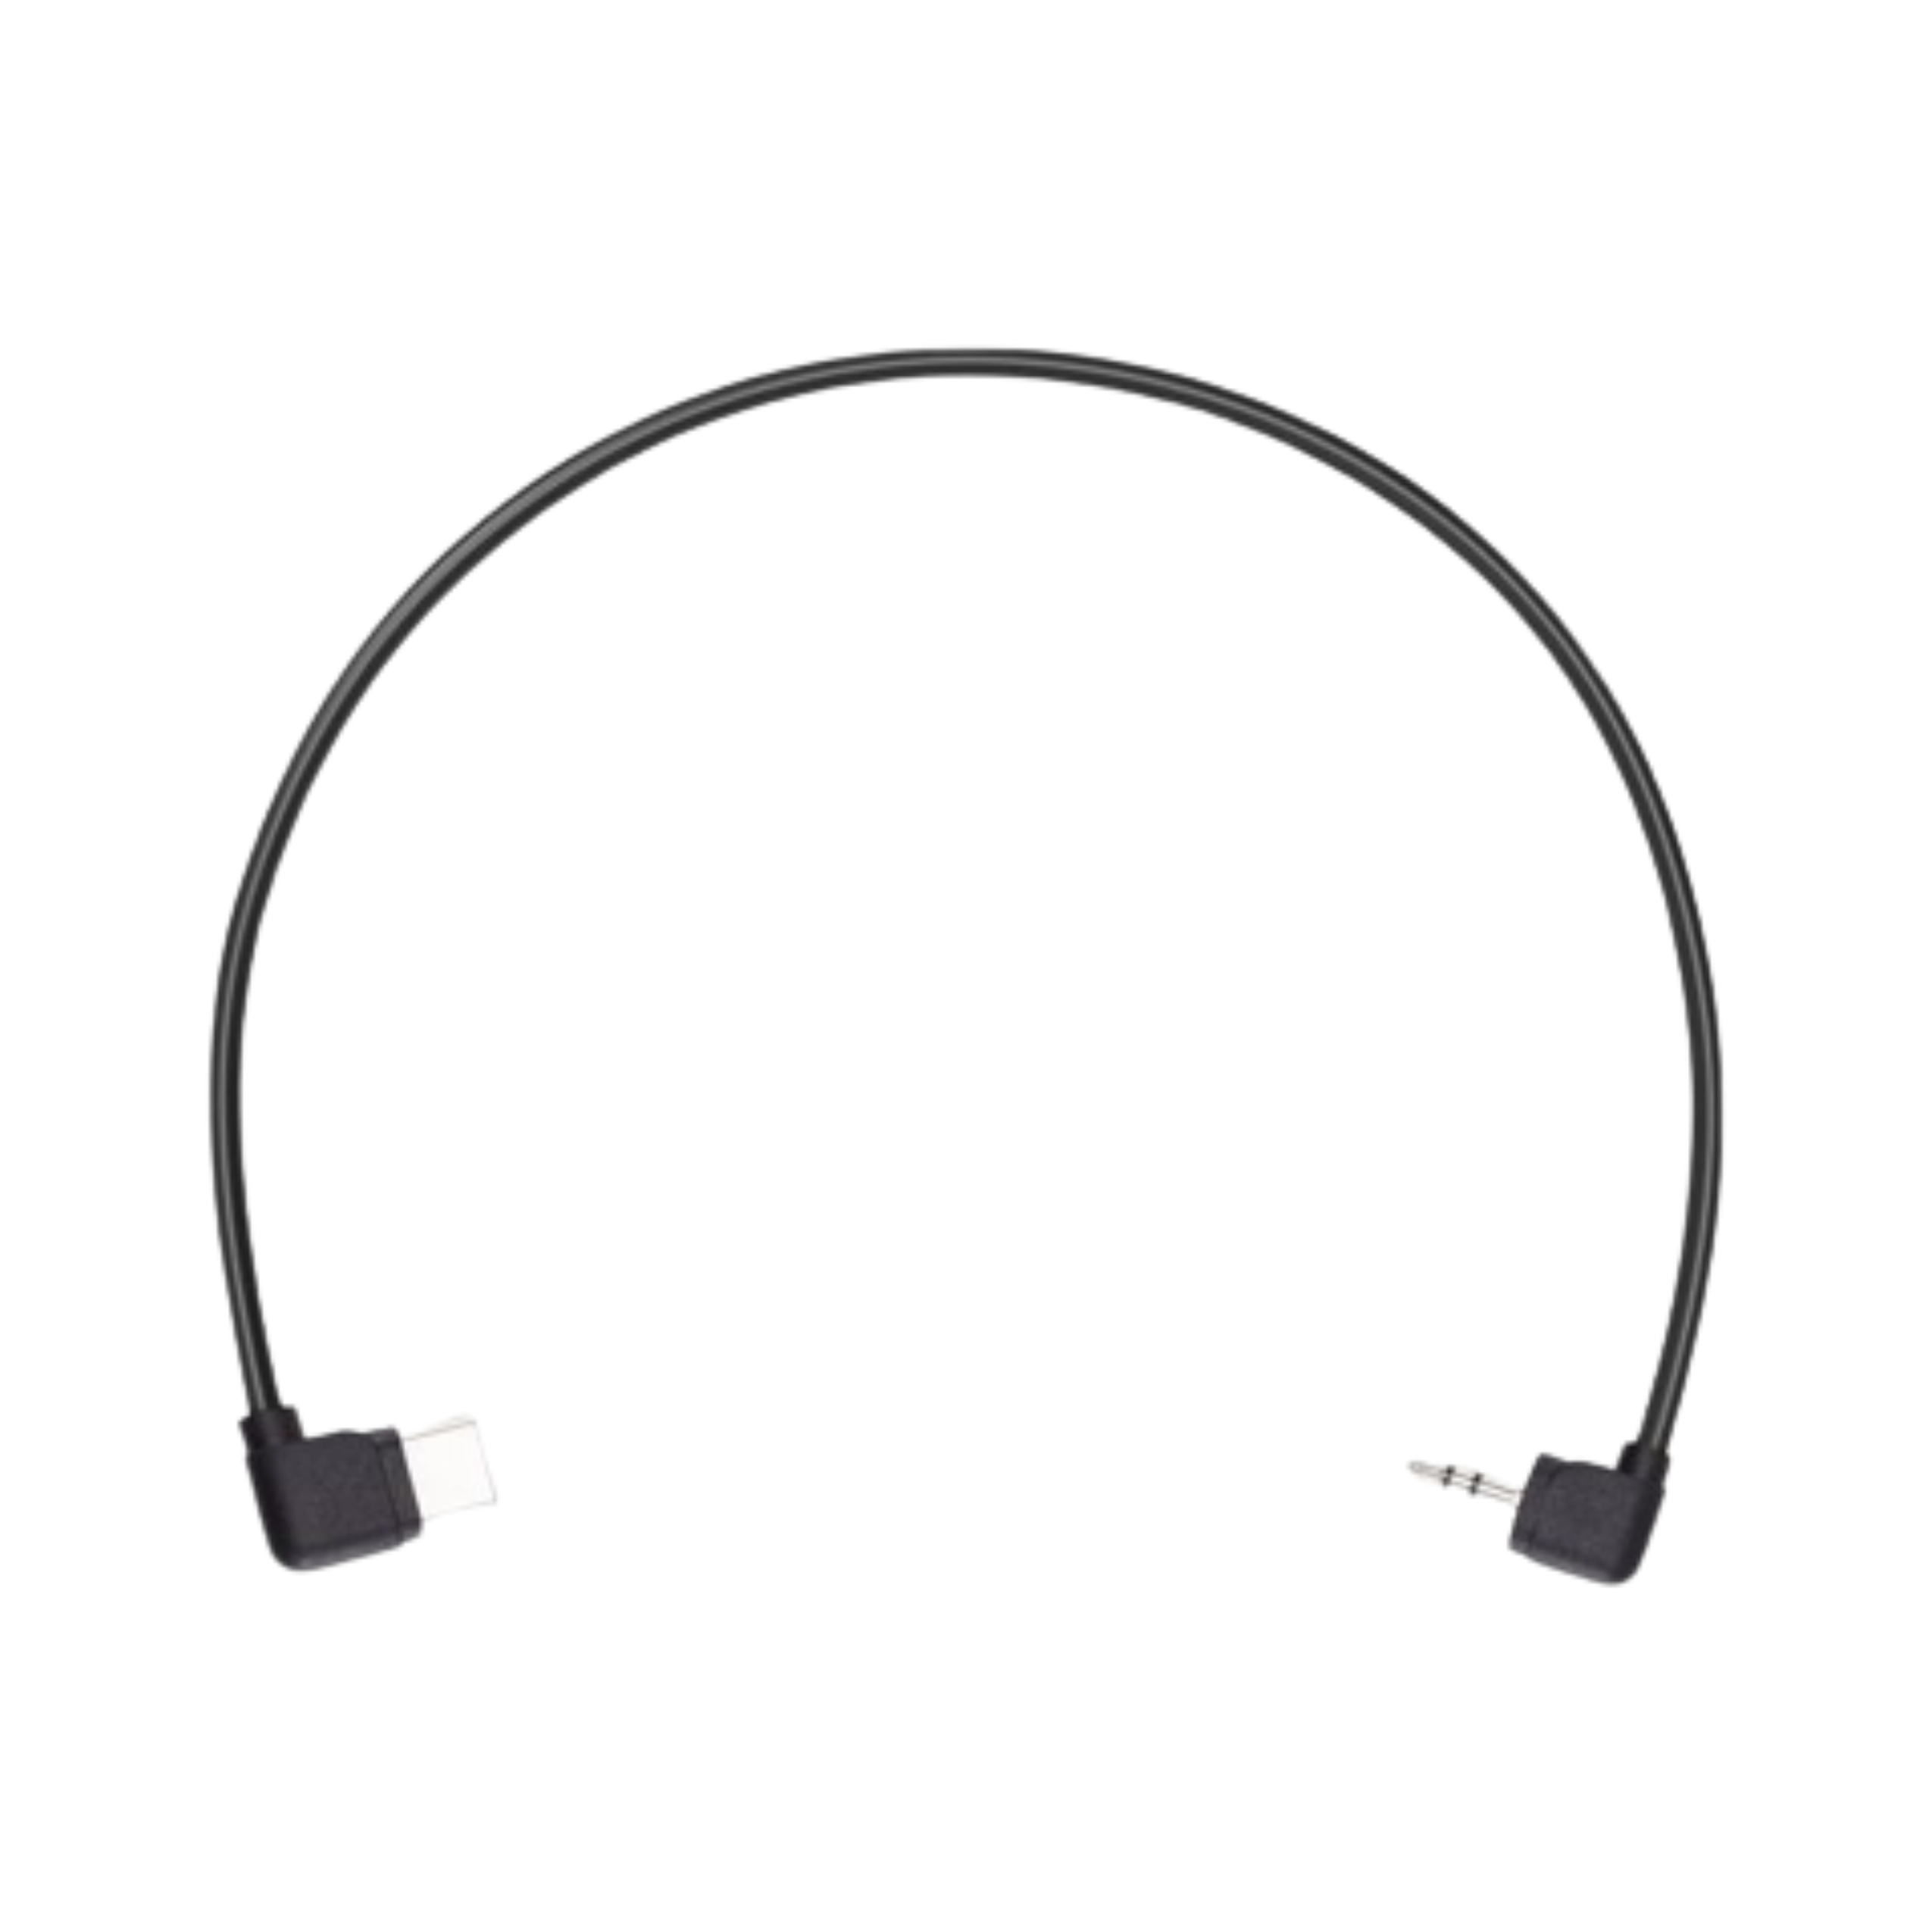 RONIN-SC RSS CONTROL CABLE FOR FUJIFILM - DroneDynamics.ca